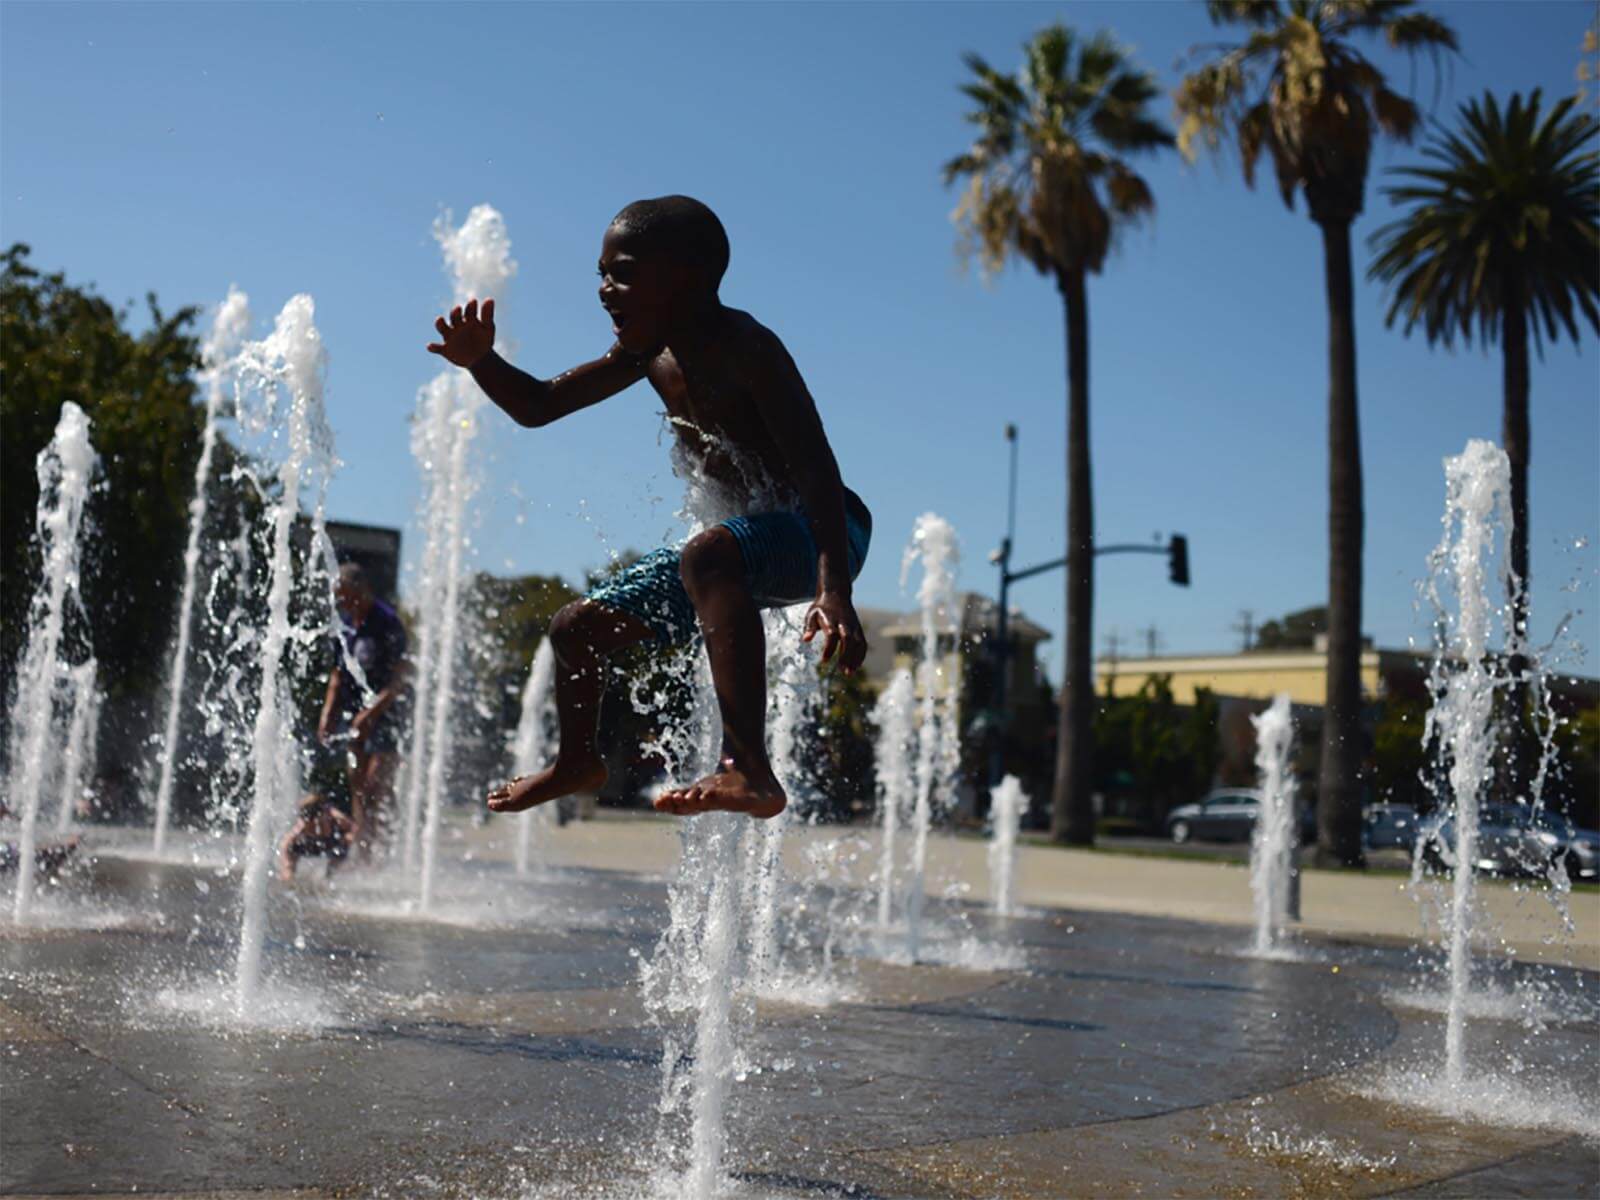 Child playing in public water fountain in Fairfield CA